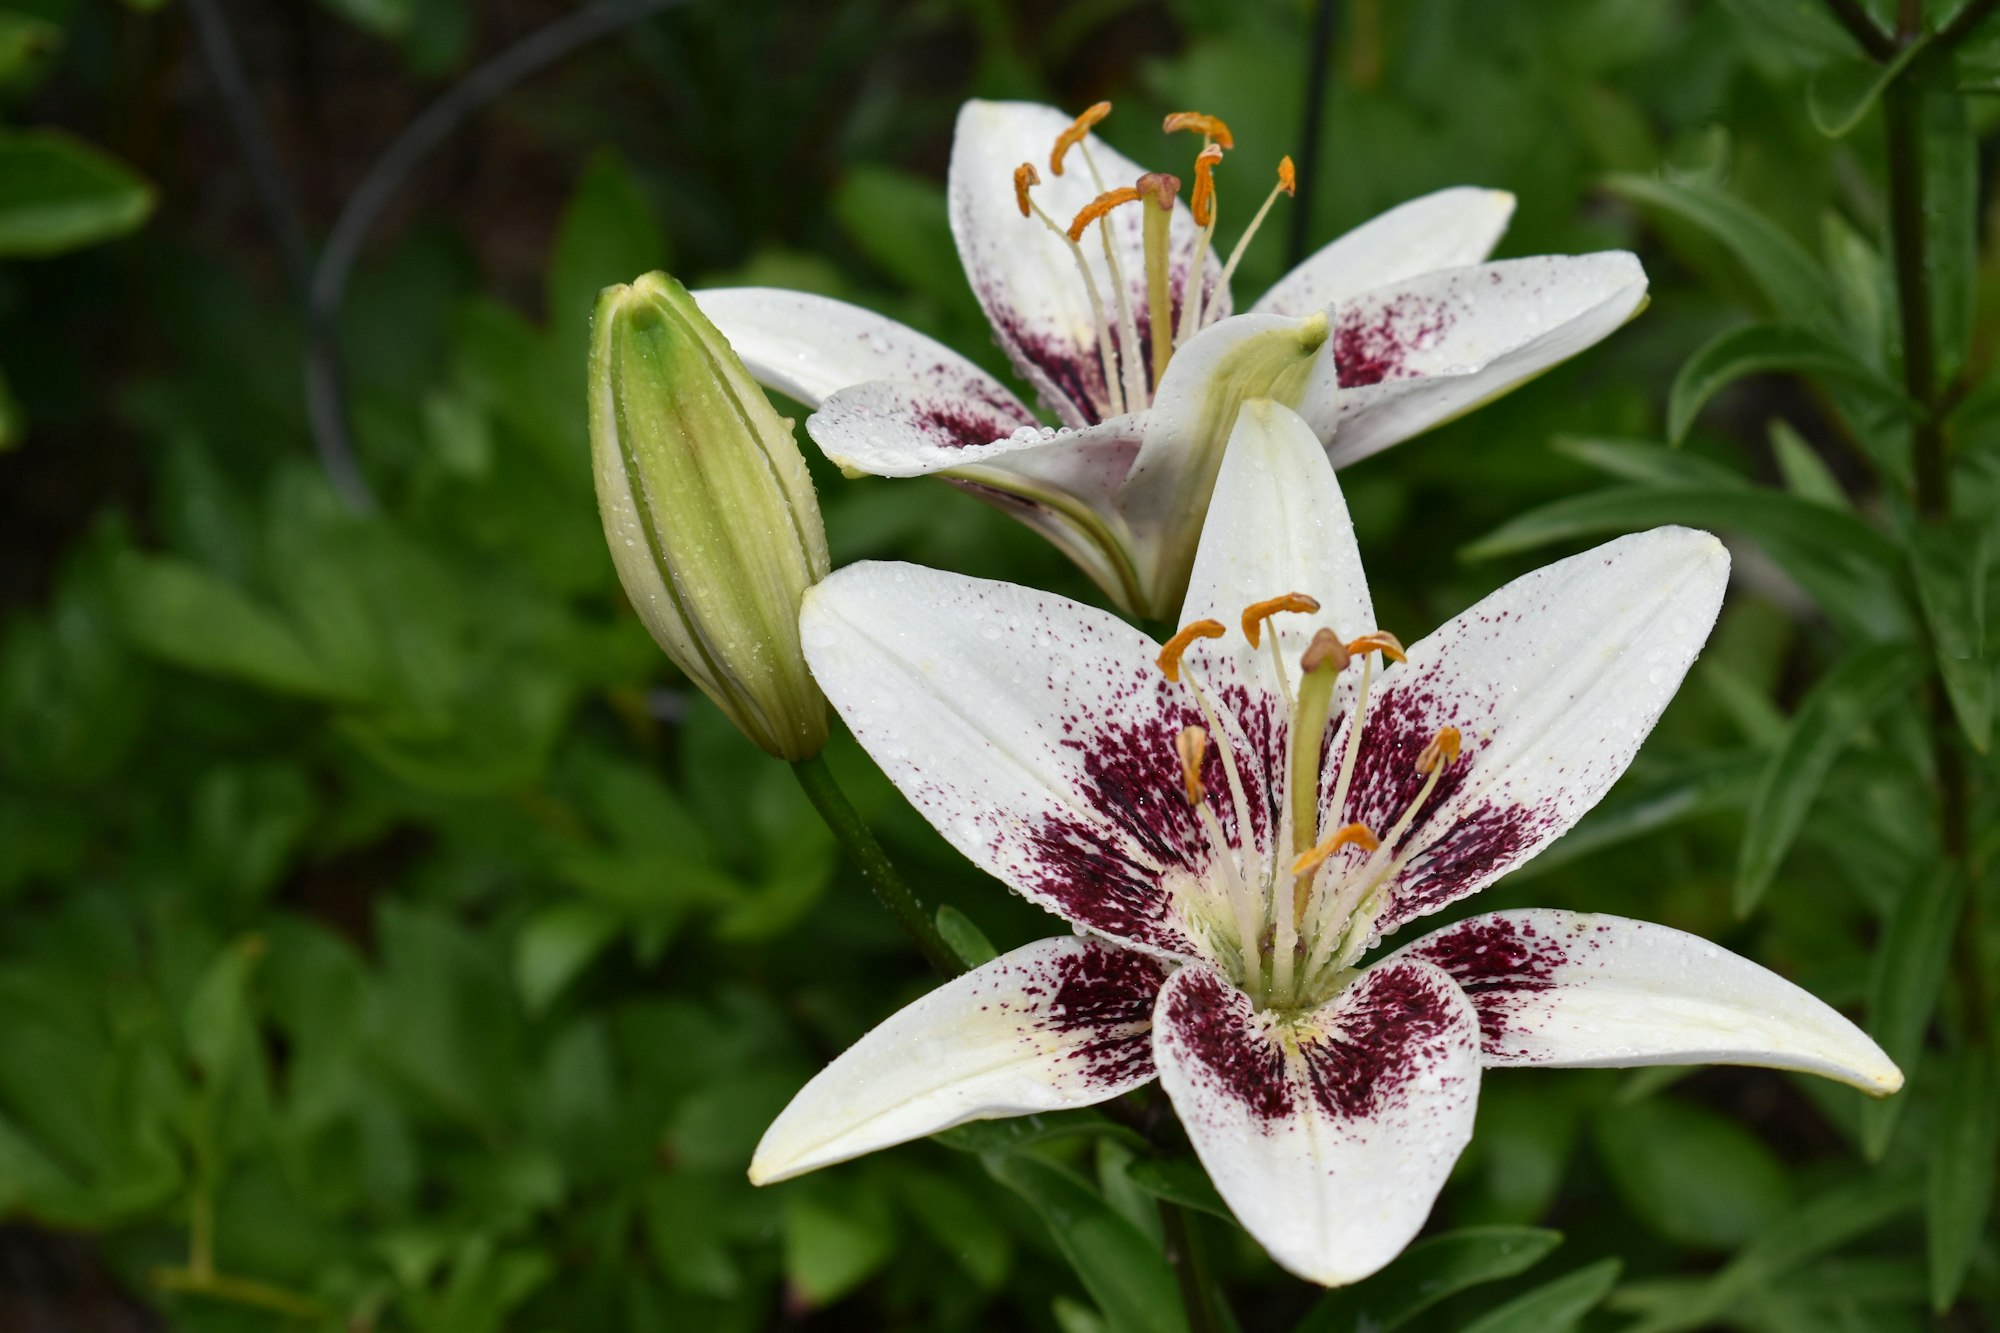 lilies poisonous to dogs